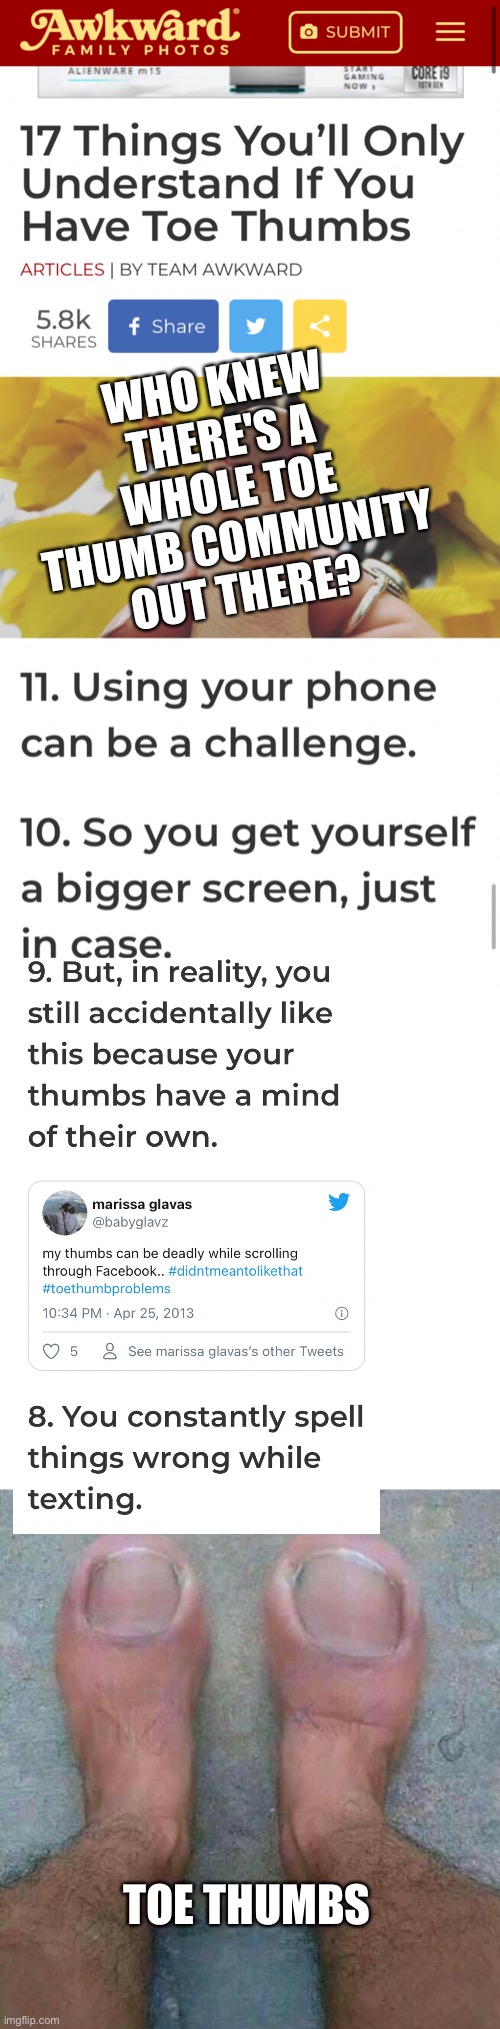 Do you have weirdly specific physical insecurities? My thumbs don't match. One is a toe thumb (or as some say "the murderer's th | WHO KNEW THERE'S A WHOLE TOE THUMB COMMUNITY OUT THERE? TOE THUMBS | image tagged in memes,blank transparent square | made w/ Imgflip meme maker